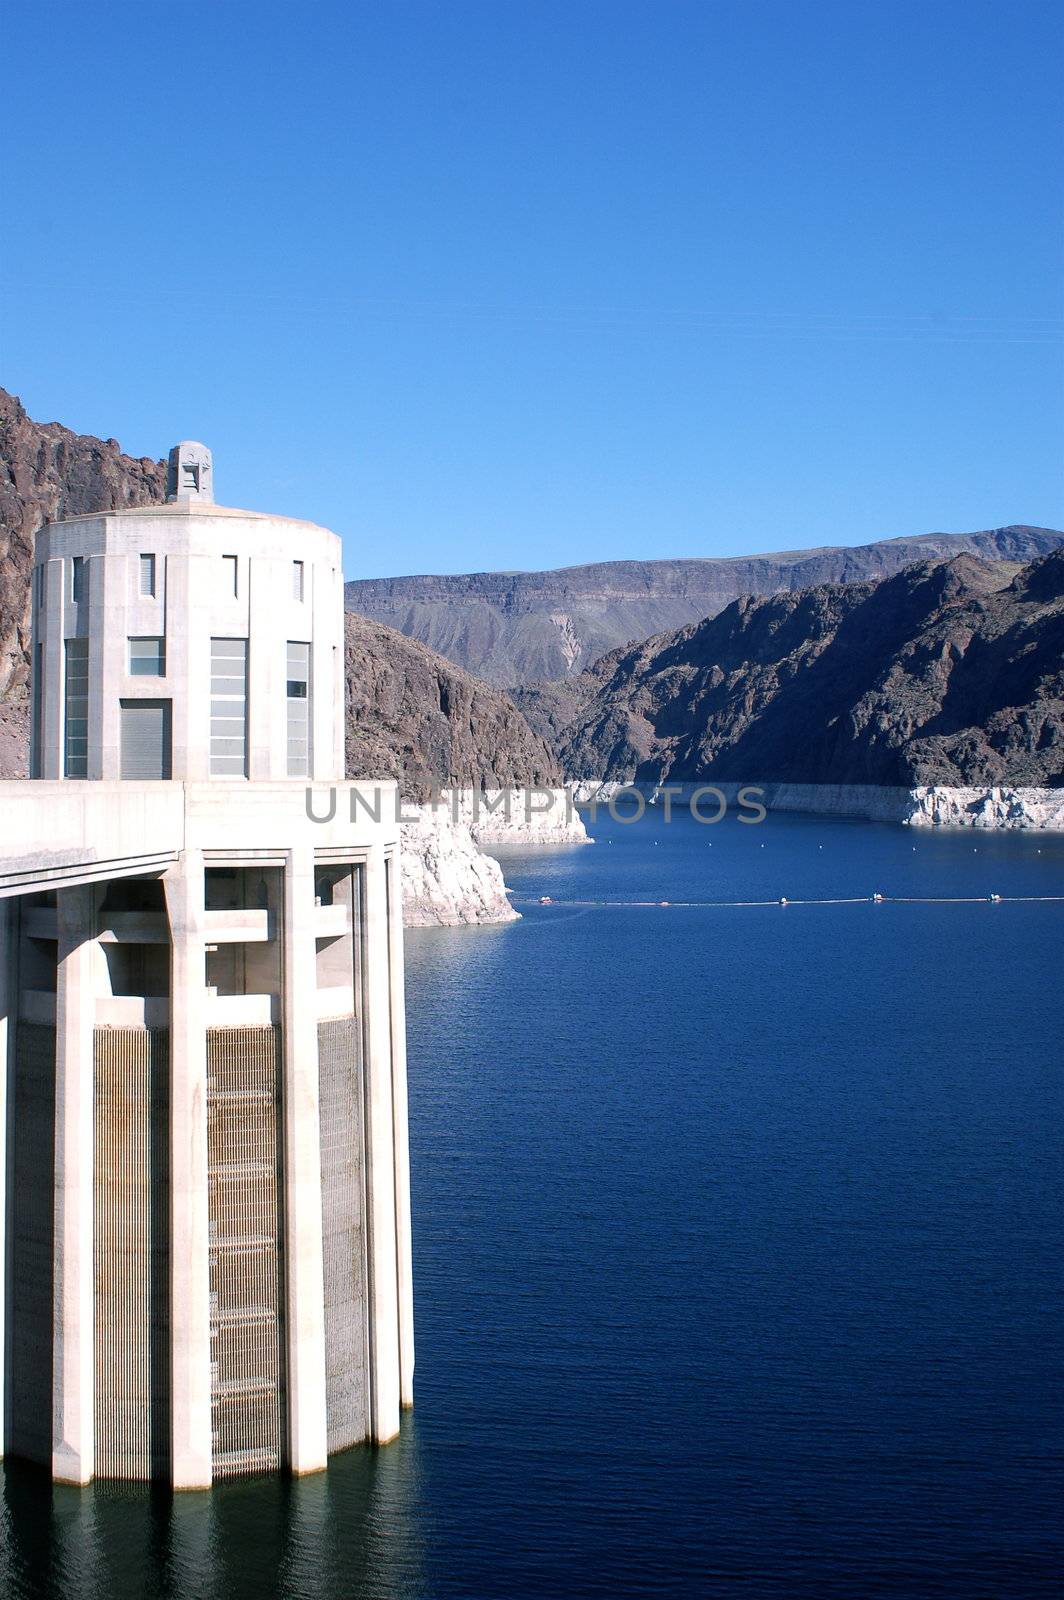 View of Lake Mead from the bridge across the Hoover Damn, between Nevada and Arizona time zones - blue water and blue sky